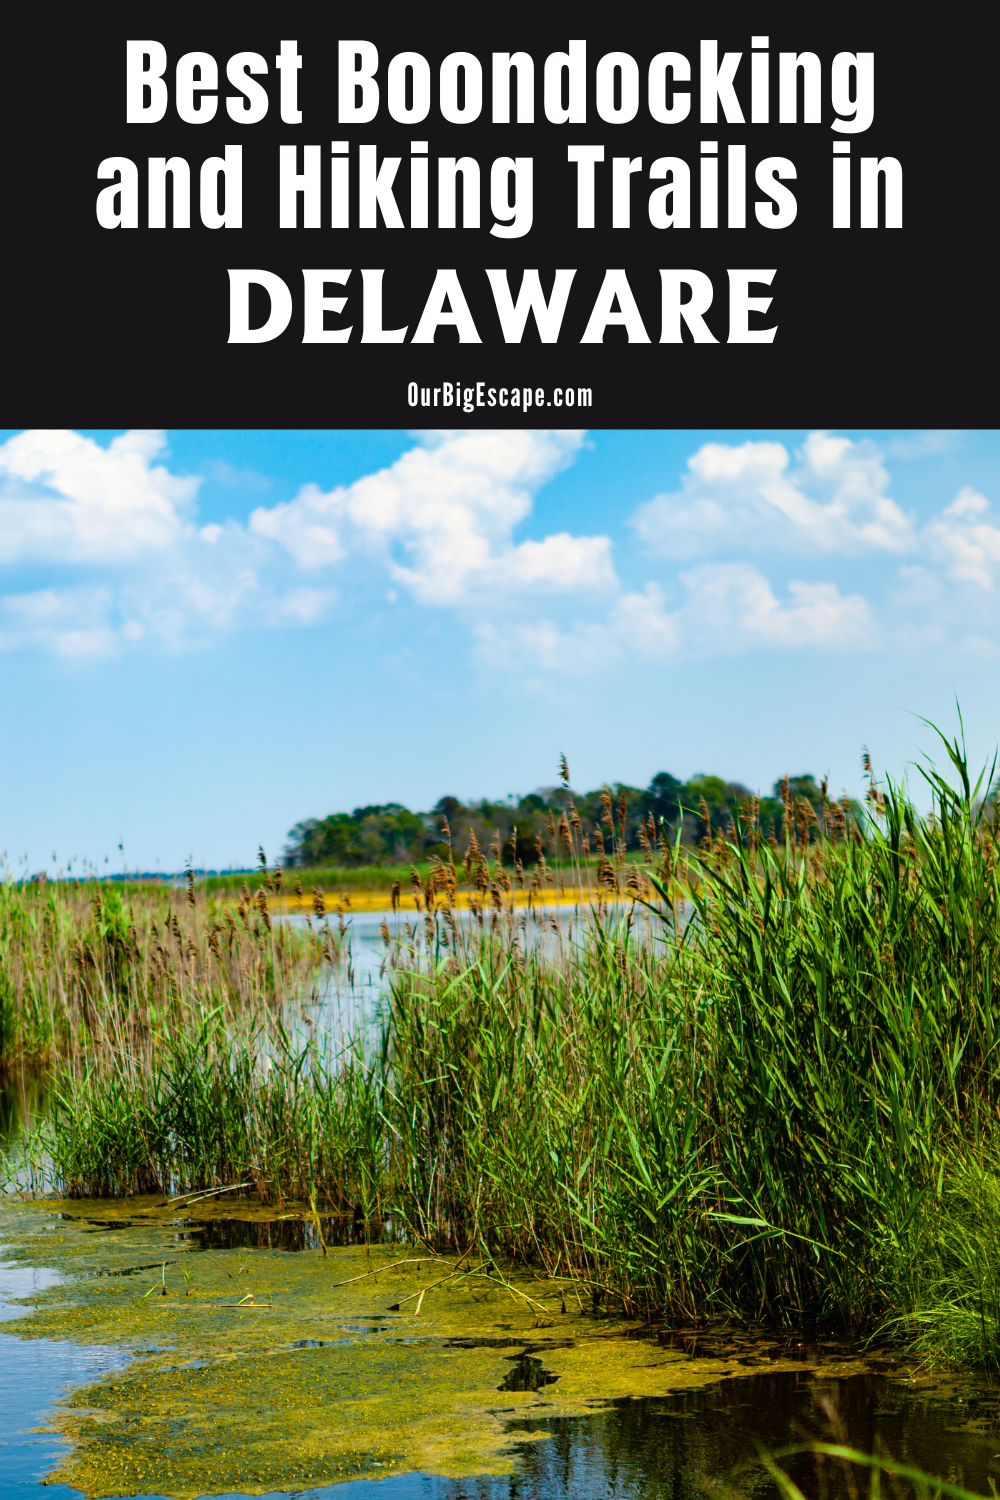 Best Boondocking and Hiking Trails in Delaware